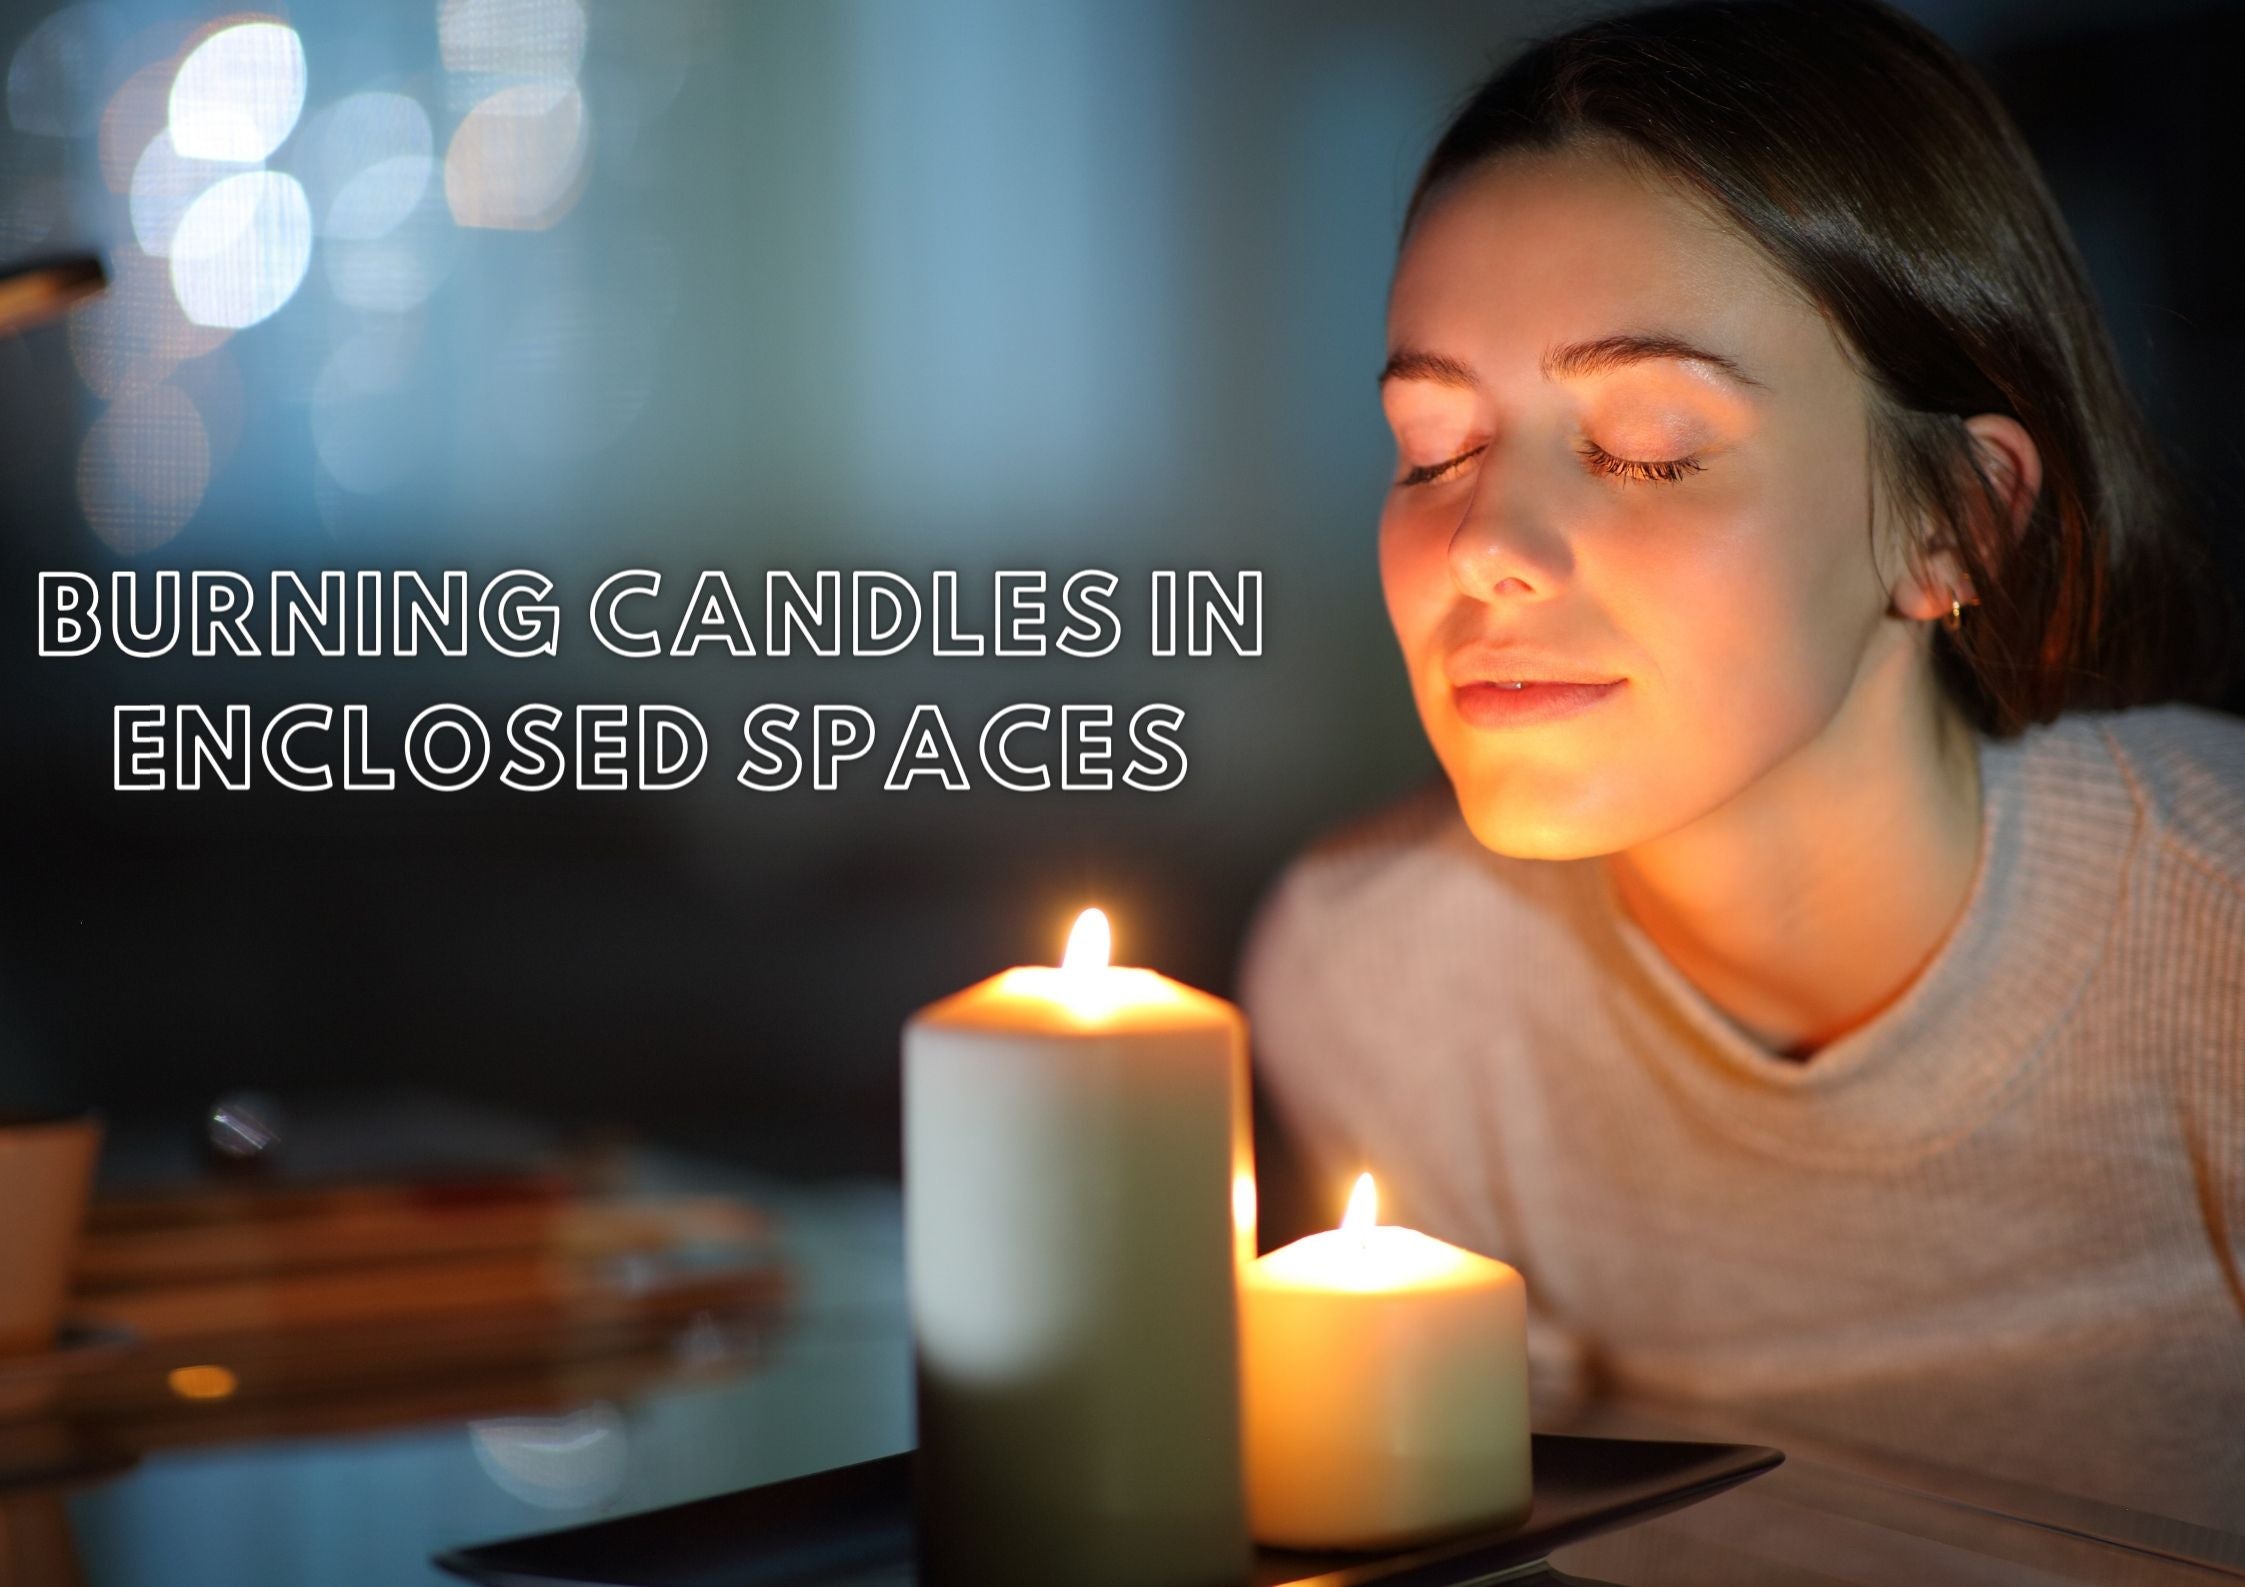 Burning candles in enclosed spaces